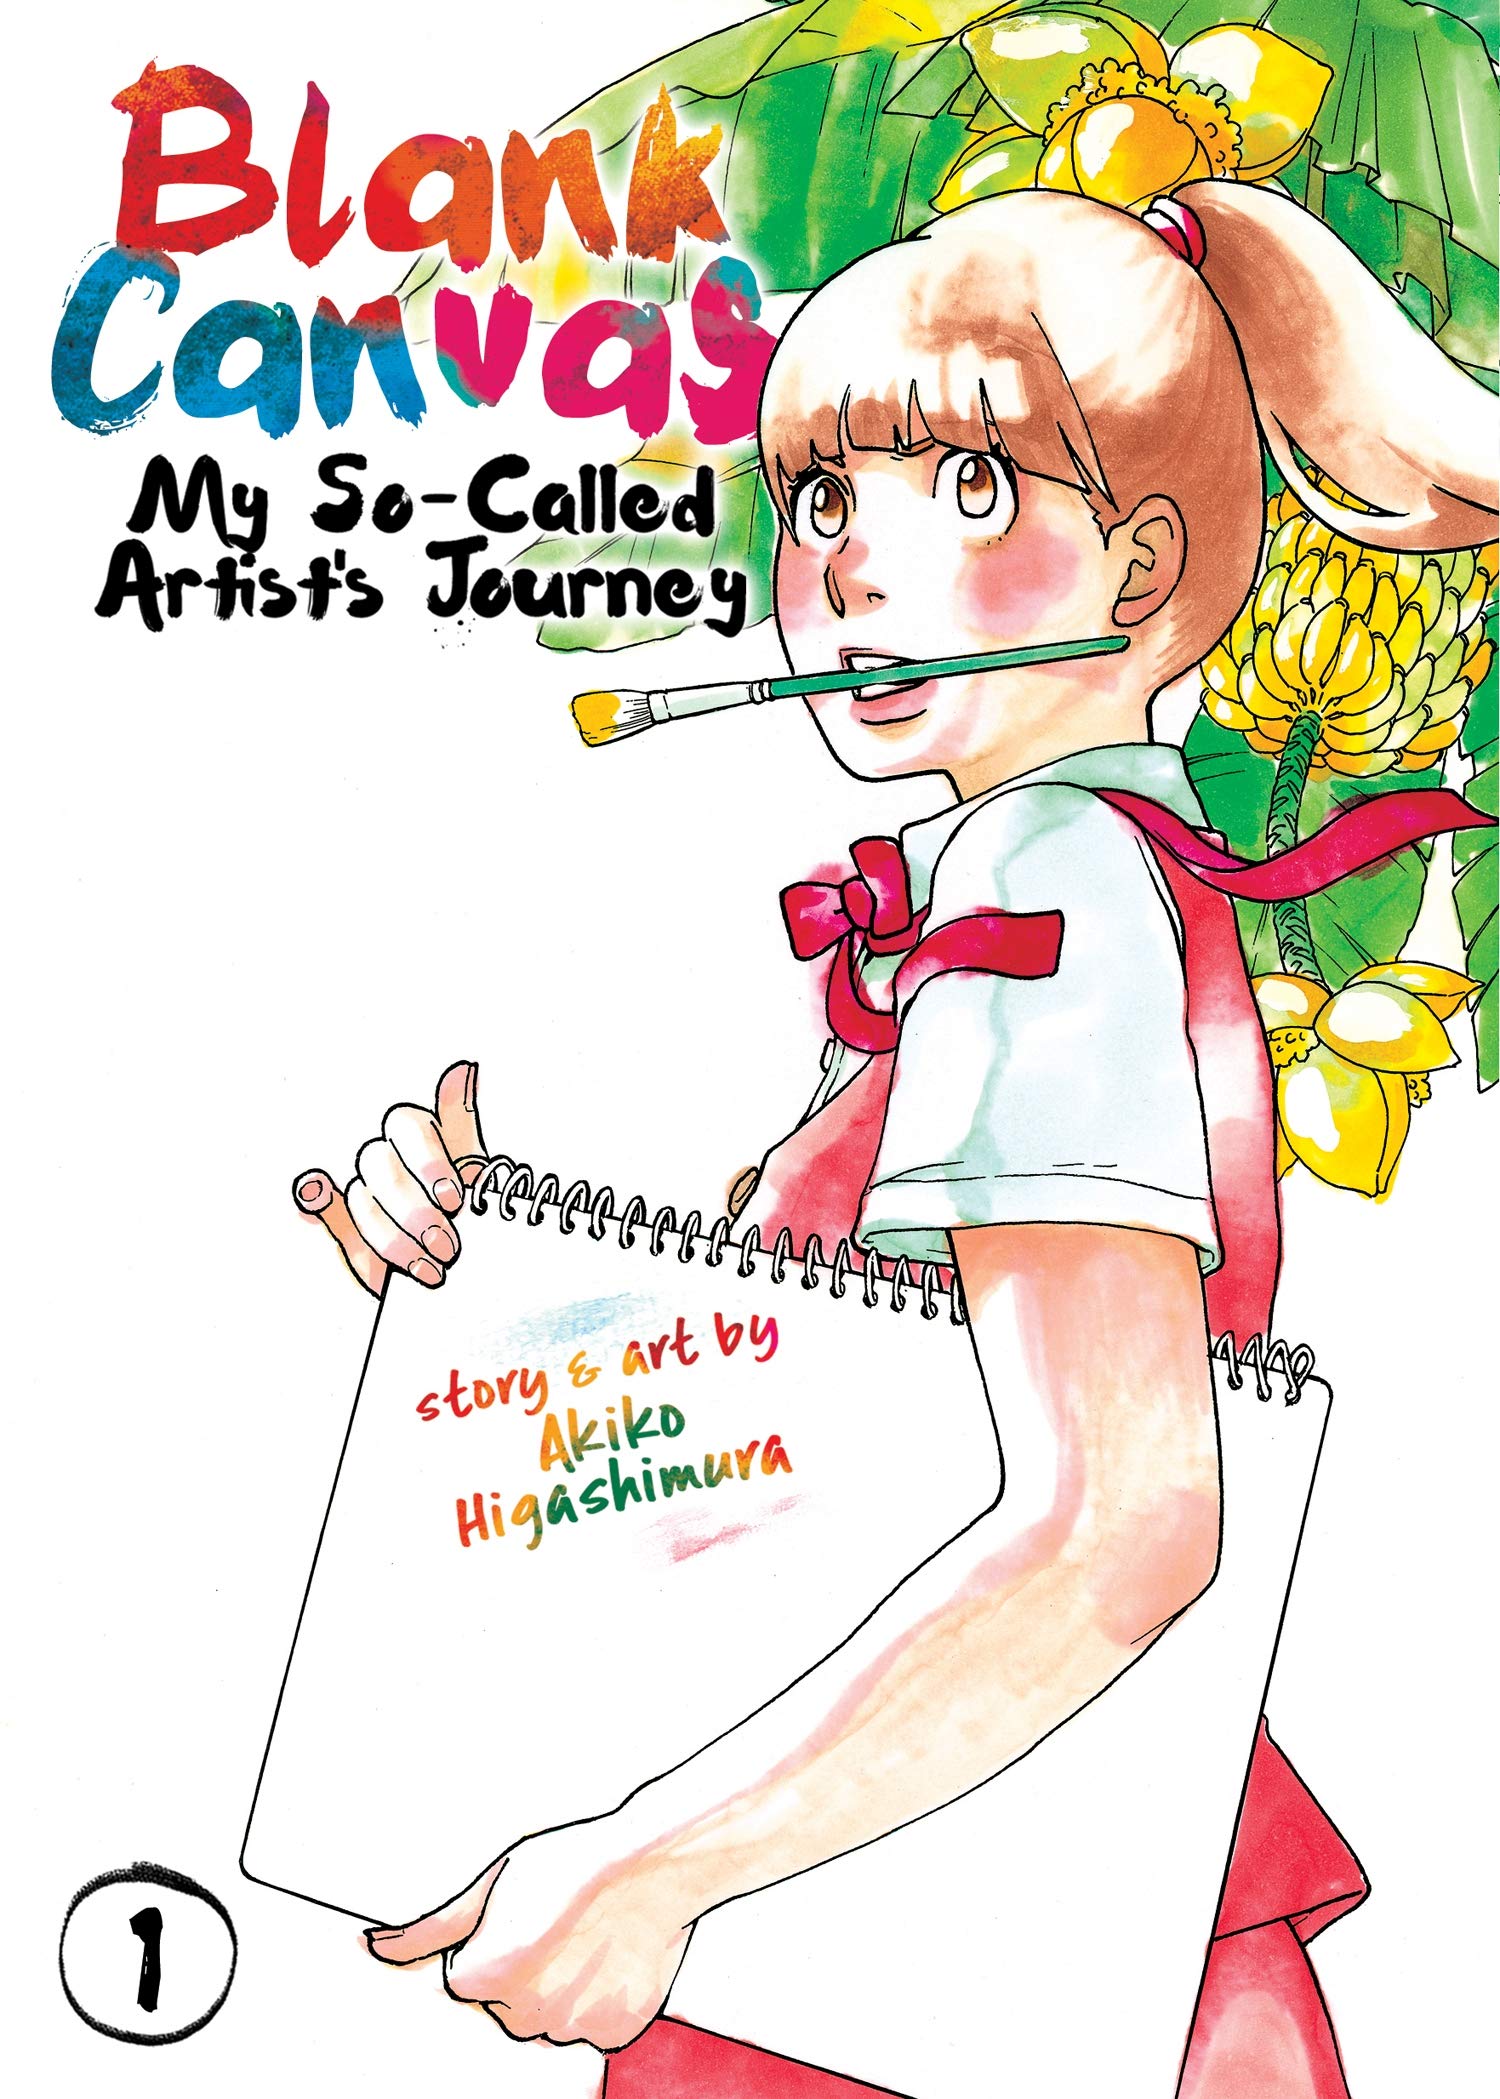 Best Comics of 2019: Blank Canvas: My So-Called Artist’s Journey